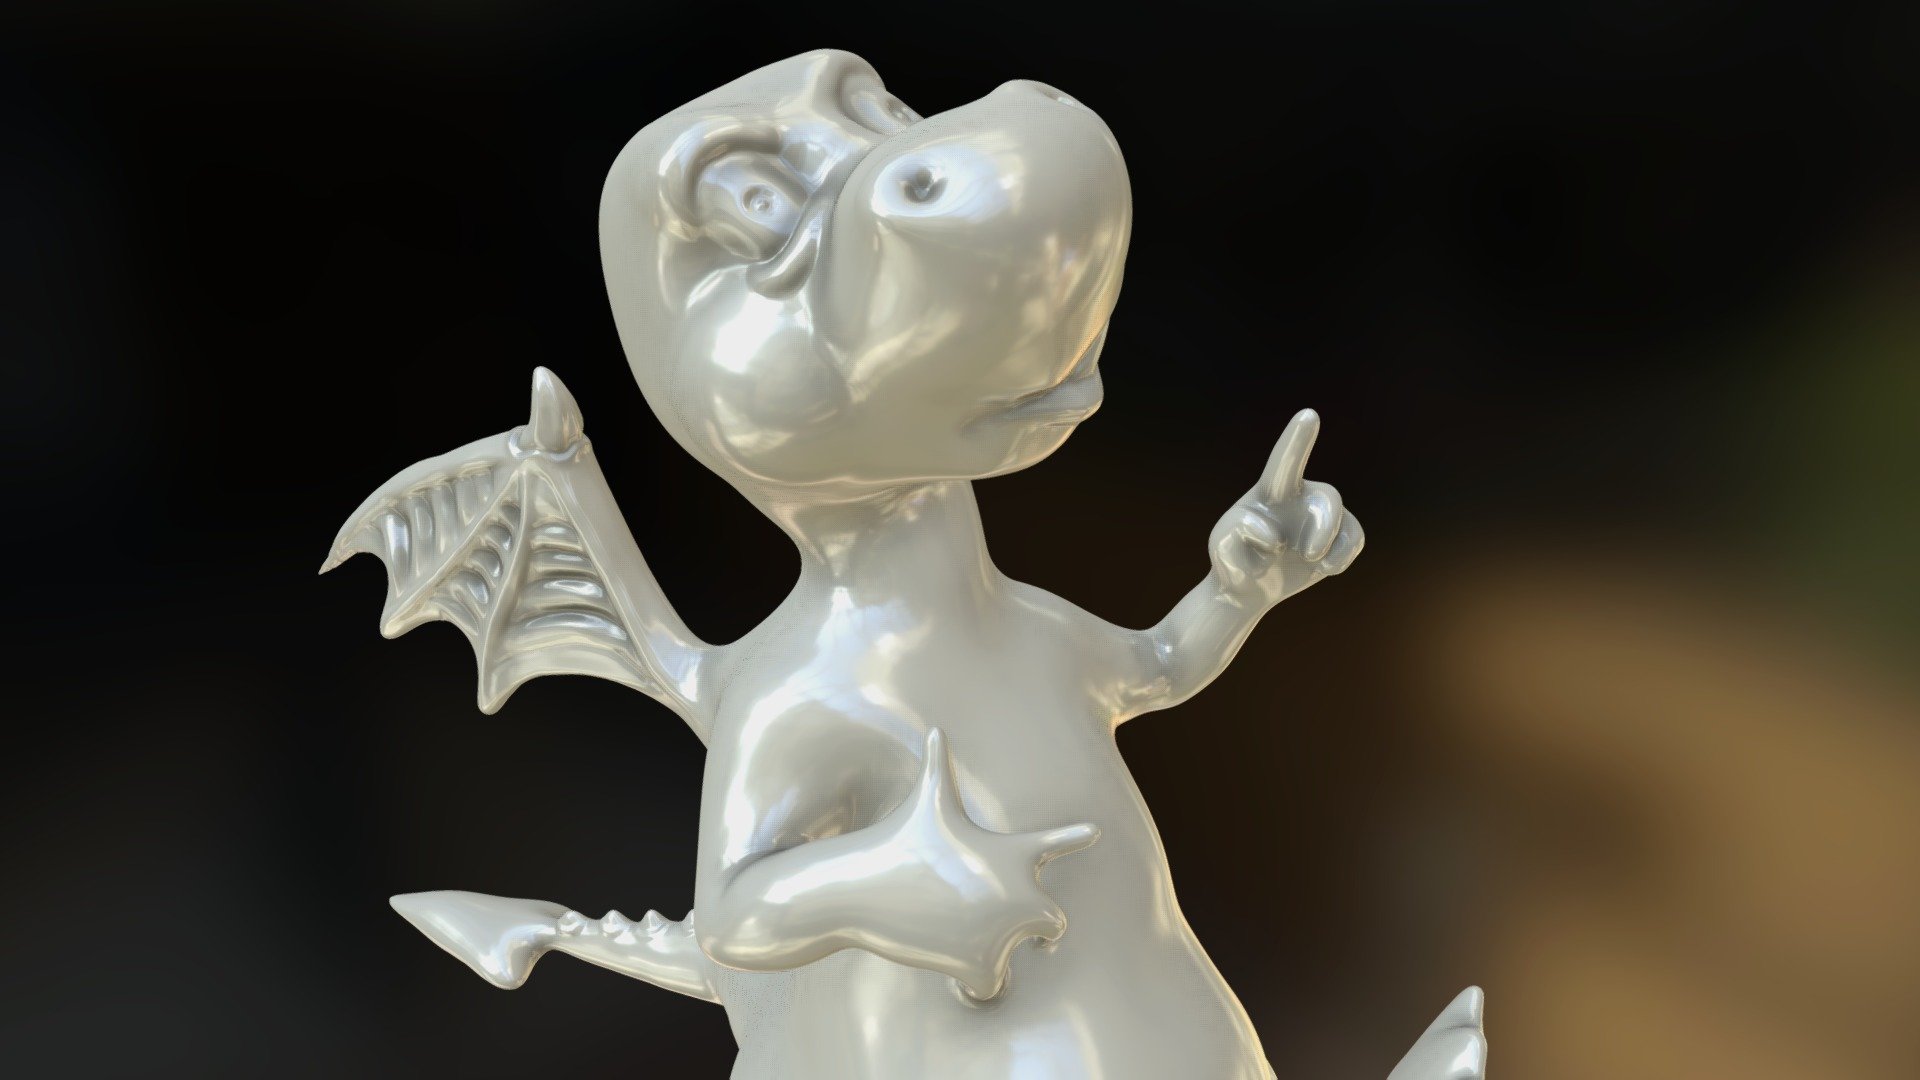 Model for 3d print on CGTrader. 

Video here - https://youtu.be/xRiXapR-7q8

You can print this model here - -link removed- - Cartoon Dragon - 3D model by Artofcharly (@charly_mod) 3d model